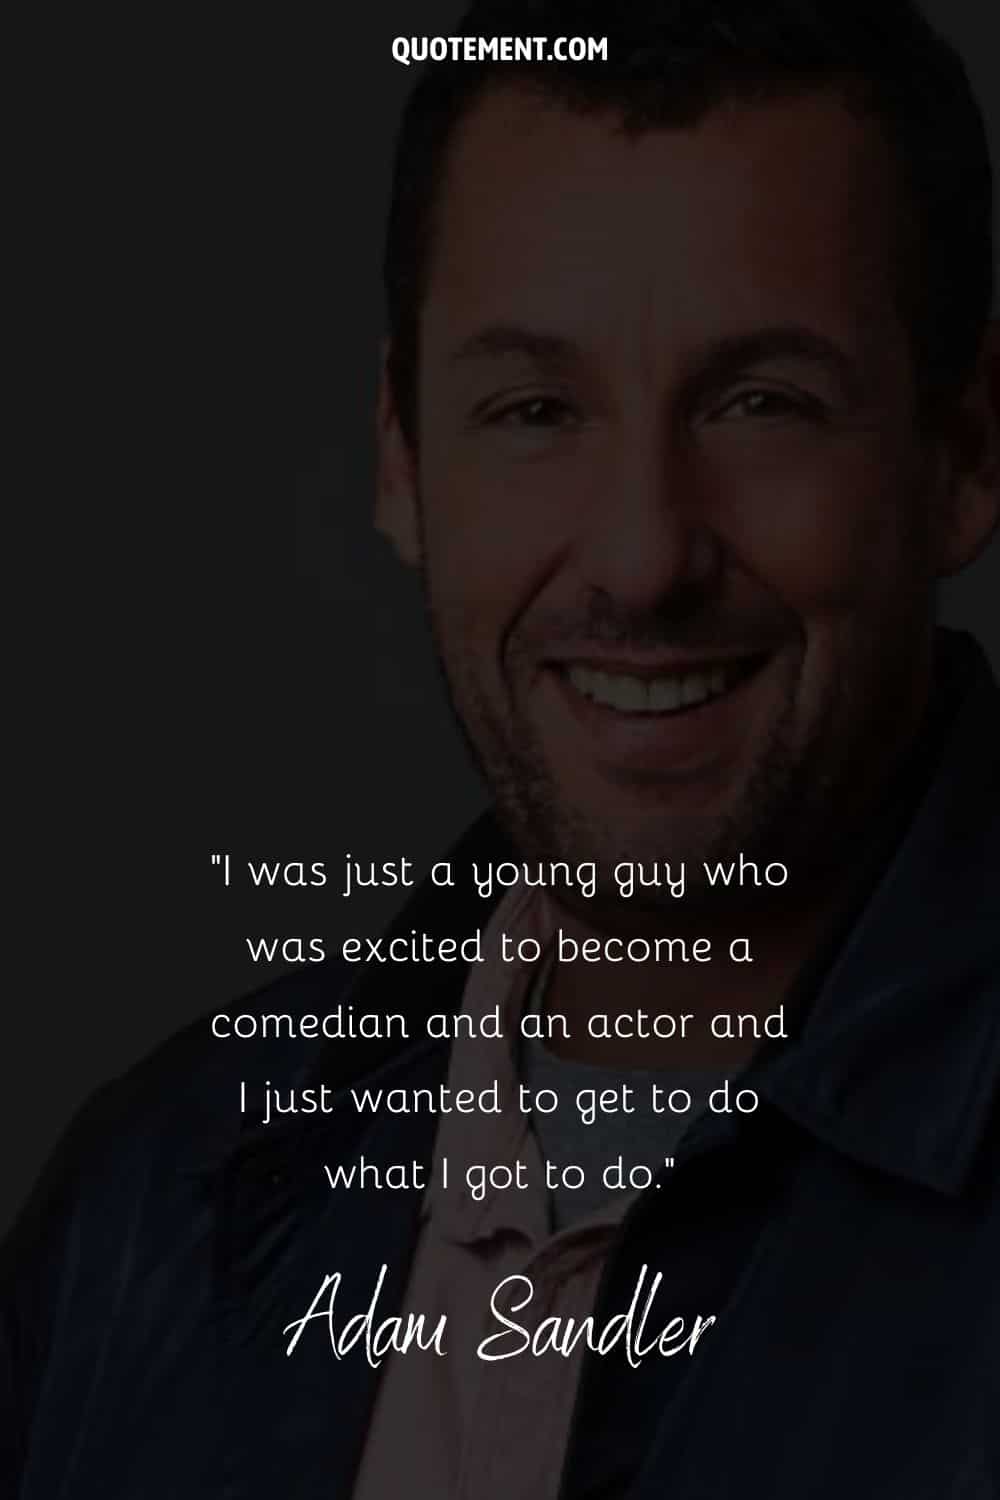 quote on being a comedian by Adam Sandler